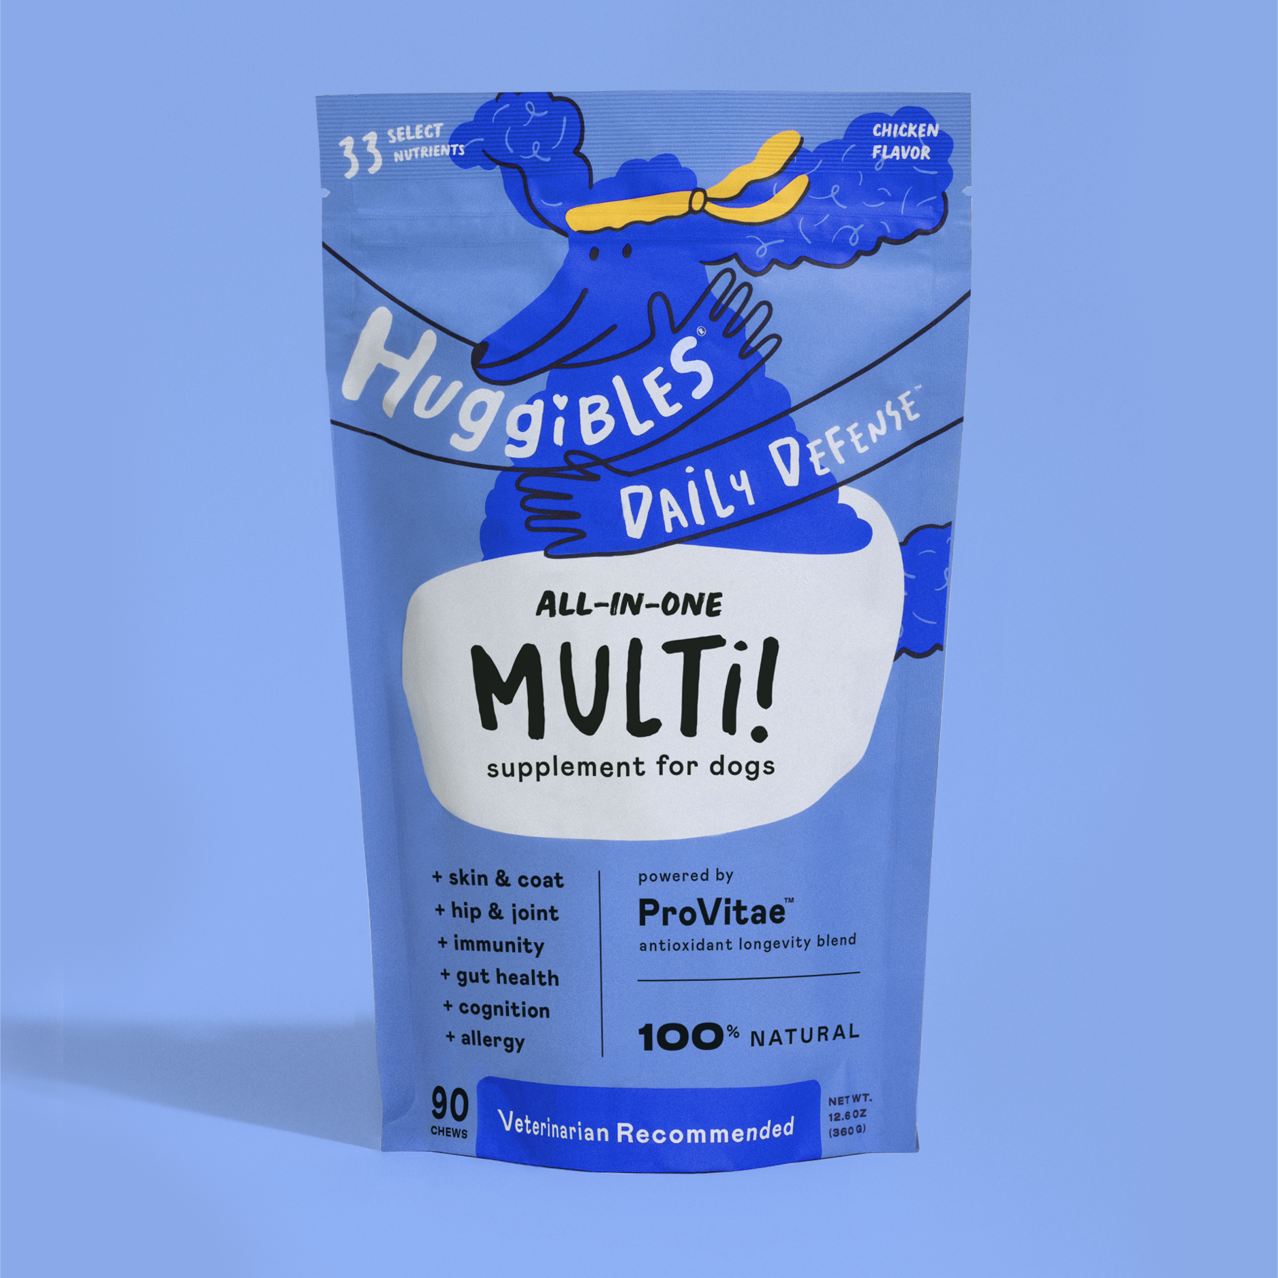 Huggibles_Dog_Supplements_Packaging_Pet_Industry_Pet_Marketing_Branding_Strategy